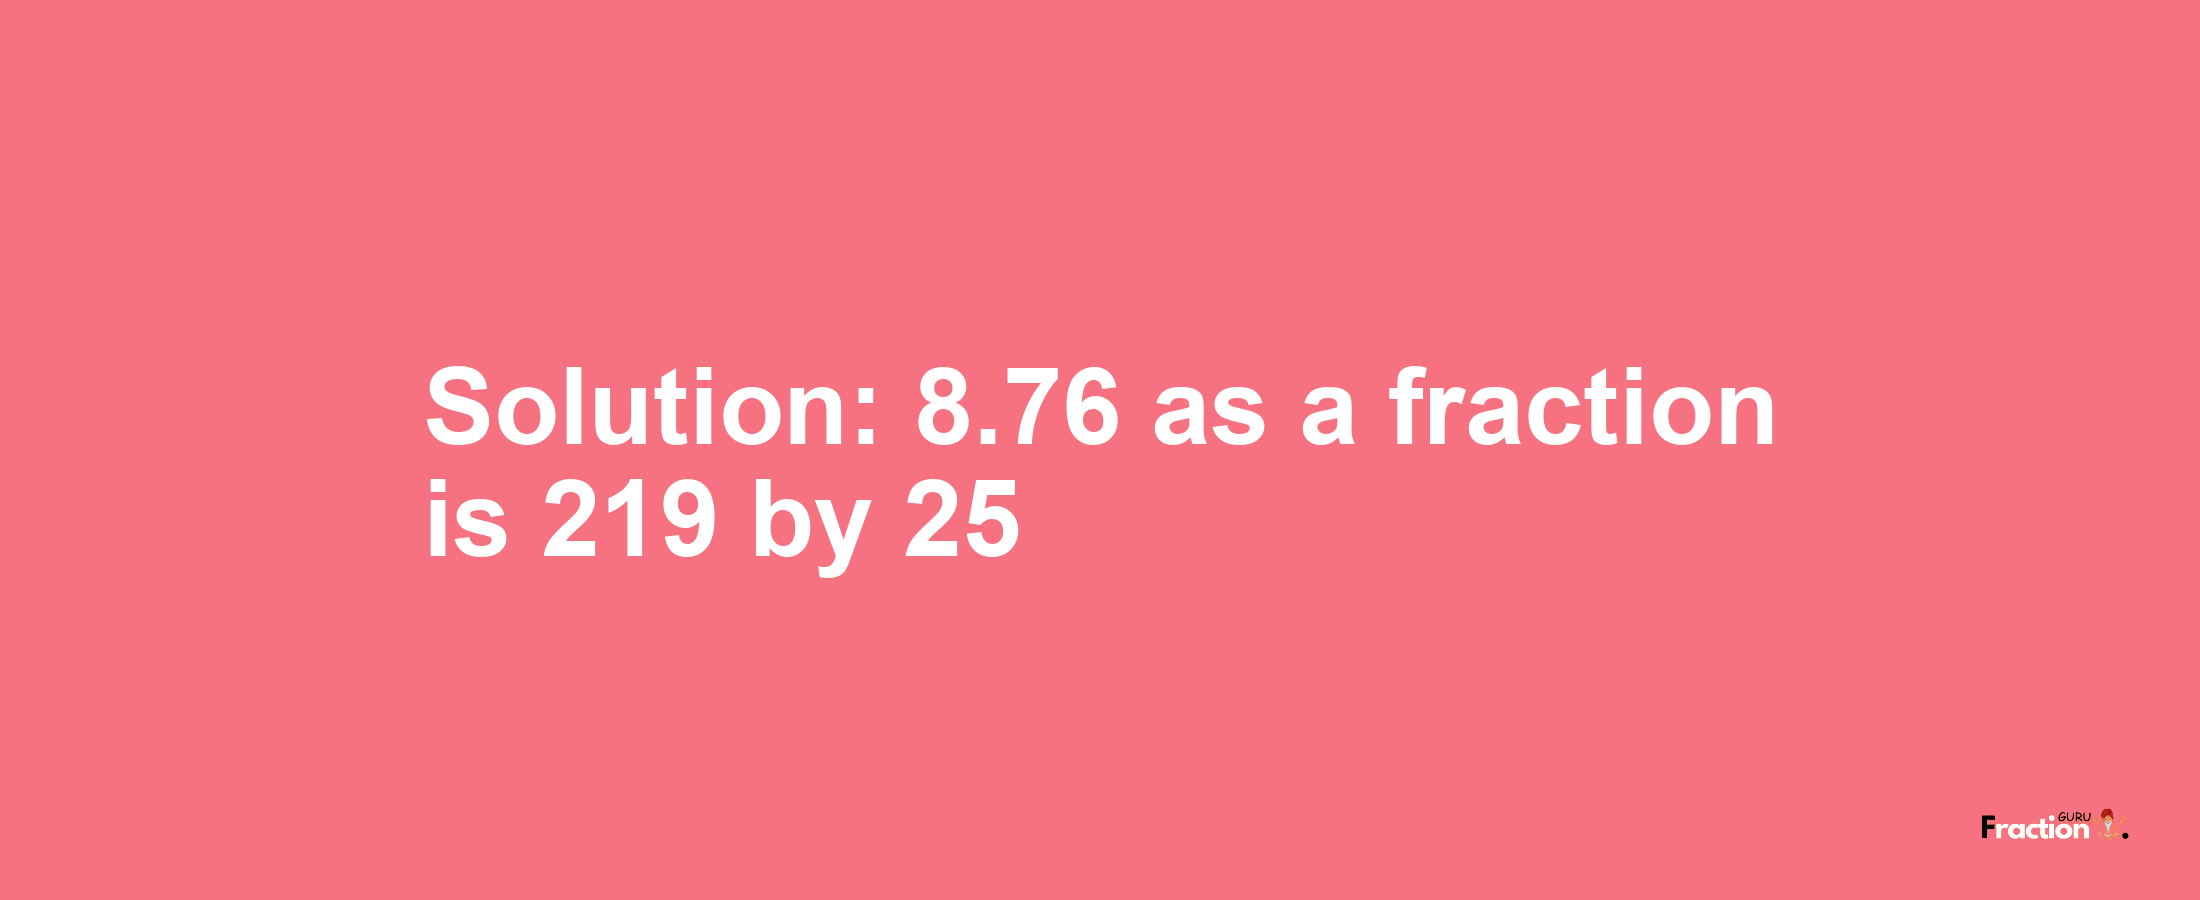 Solution:8.76 as a fraction is 219/25